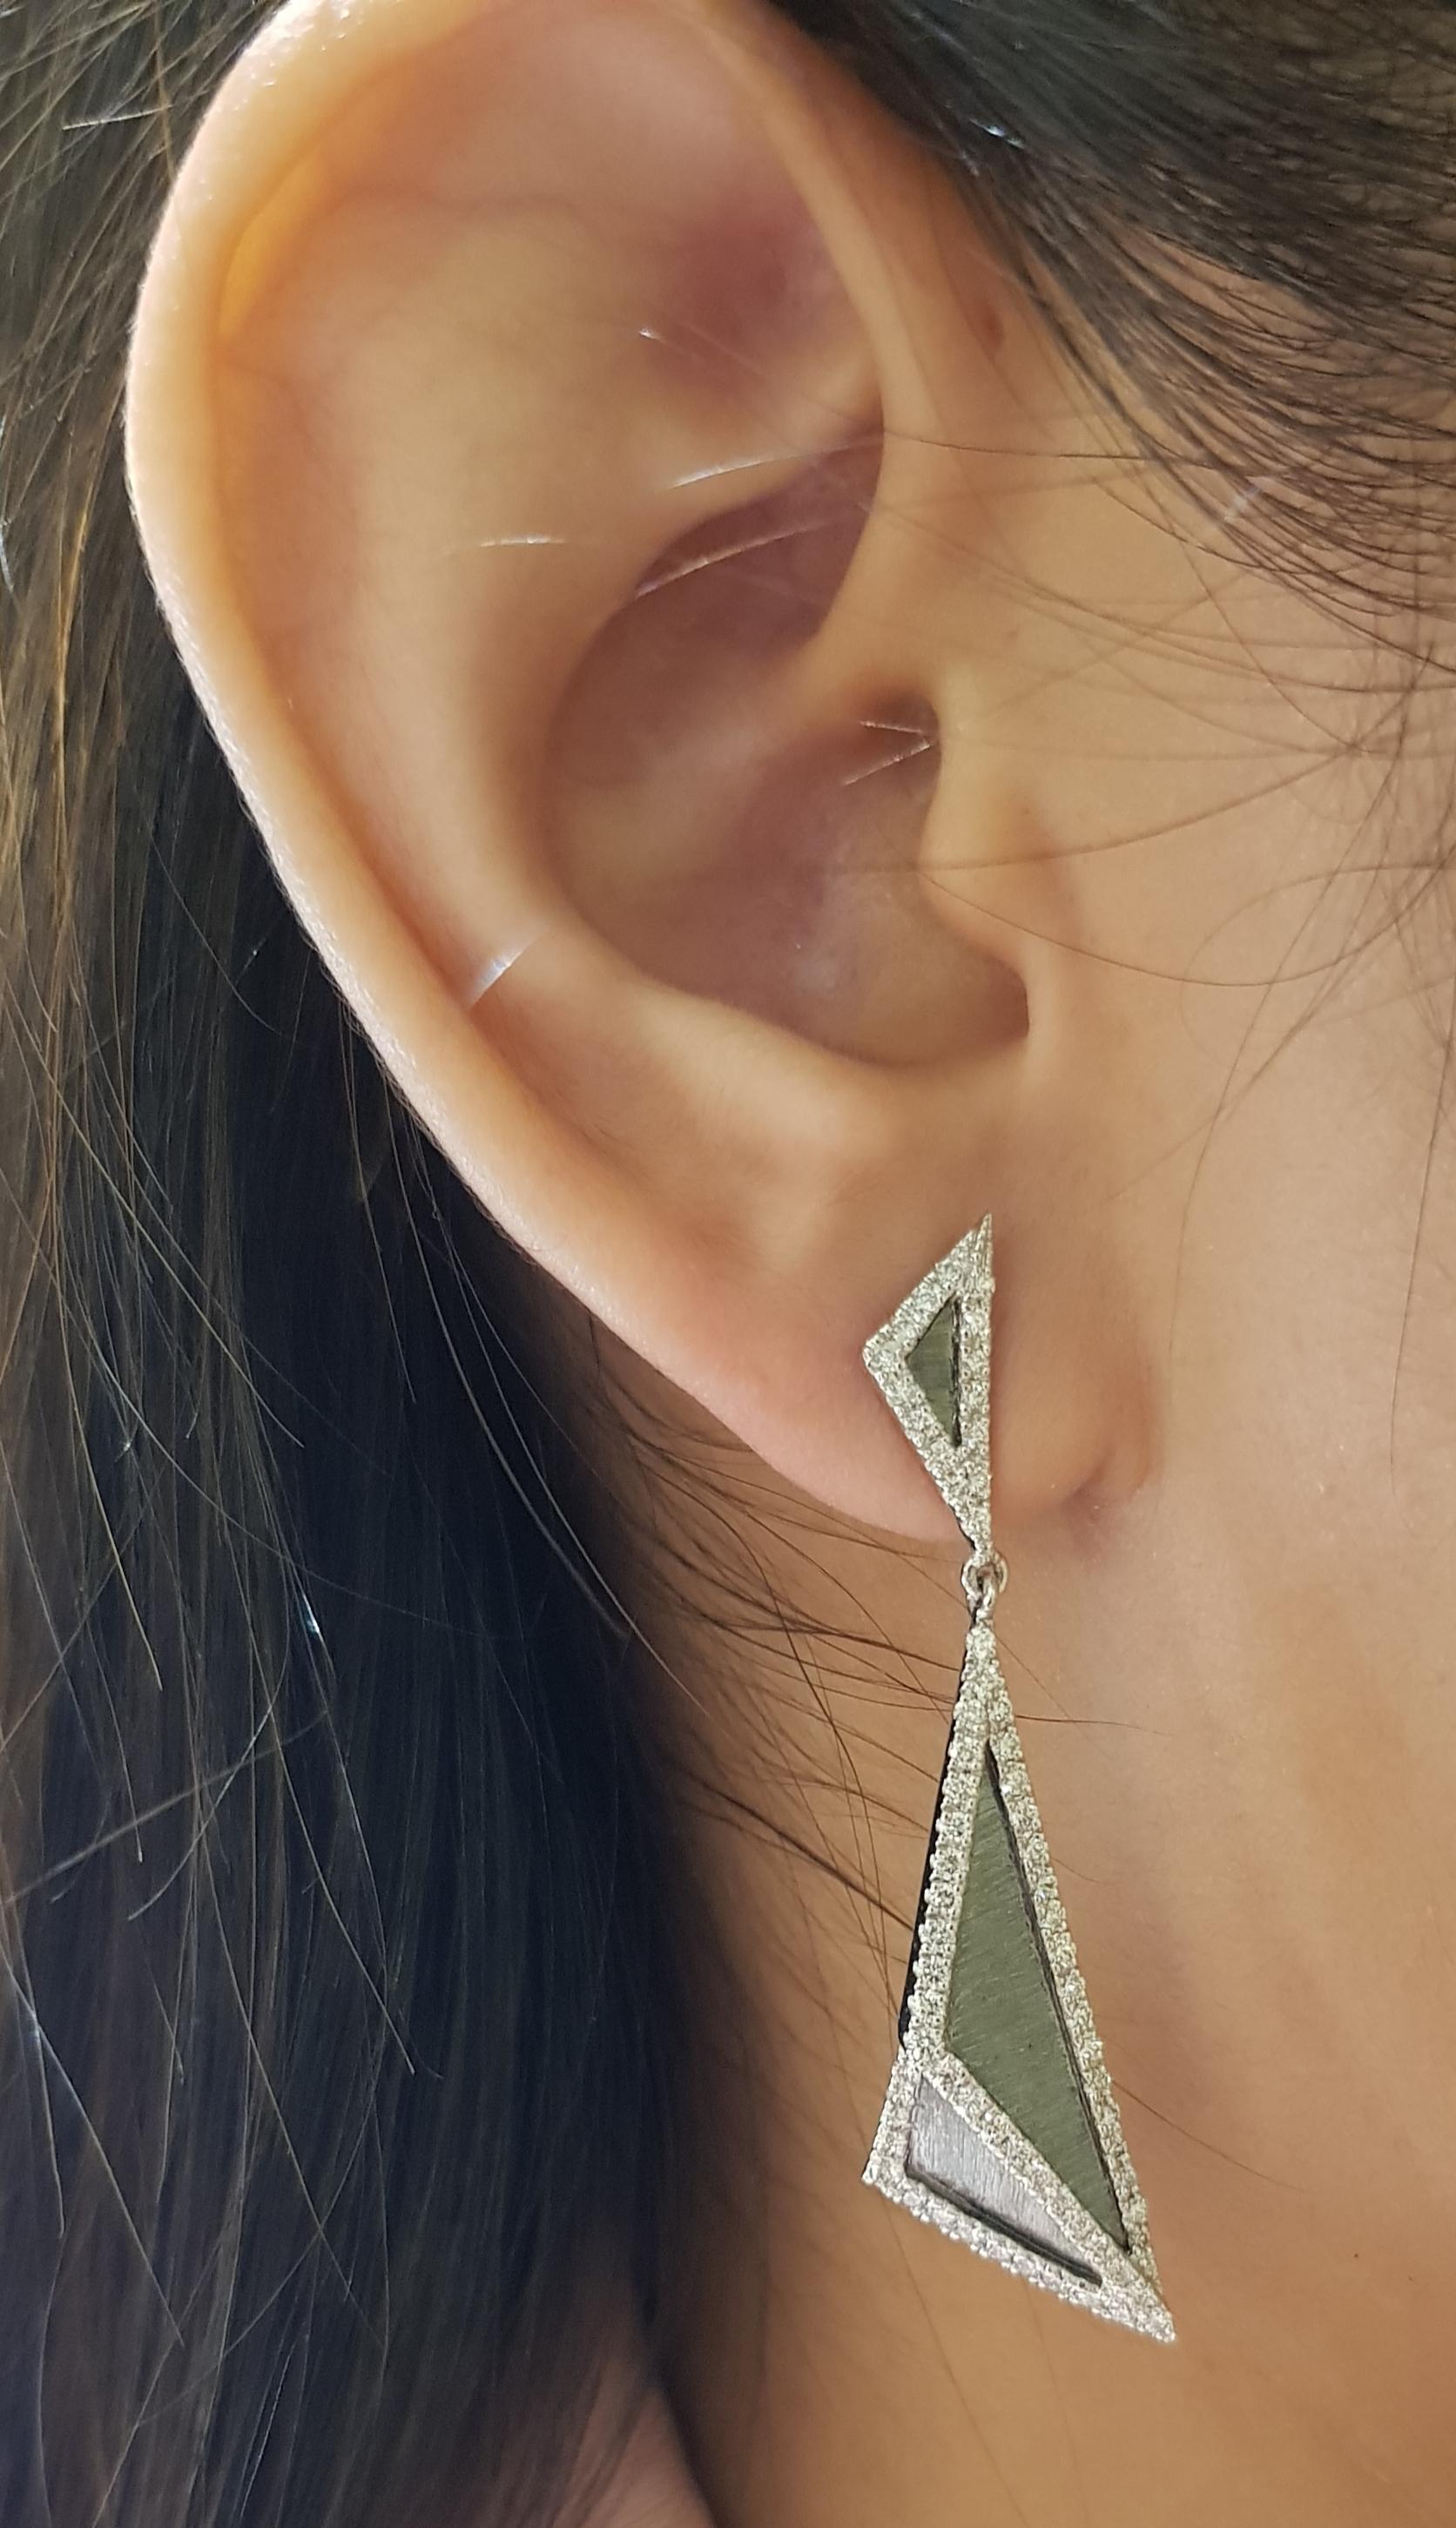 Diamond 1.17 carats Earrings set in 18 Karat White Gold Settings

Width:  1.2 cm 
Length:  4.7 cm
Total Weight: 9.74 grams

The ancient Japanese tradition of paper folding has inspired the form and elements of this modern collection. With a series